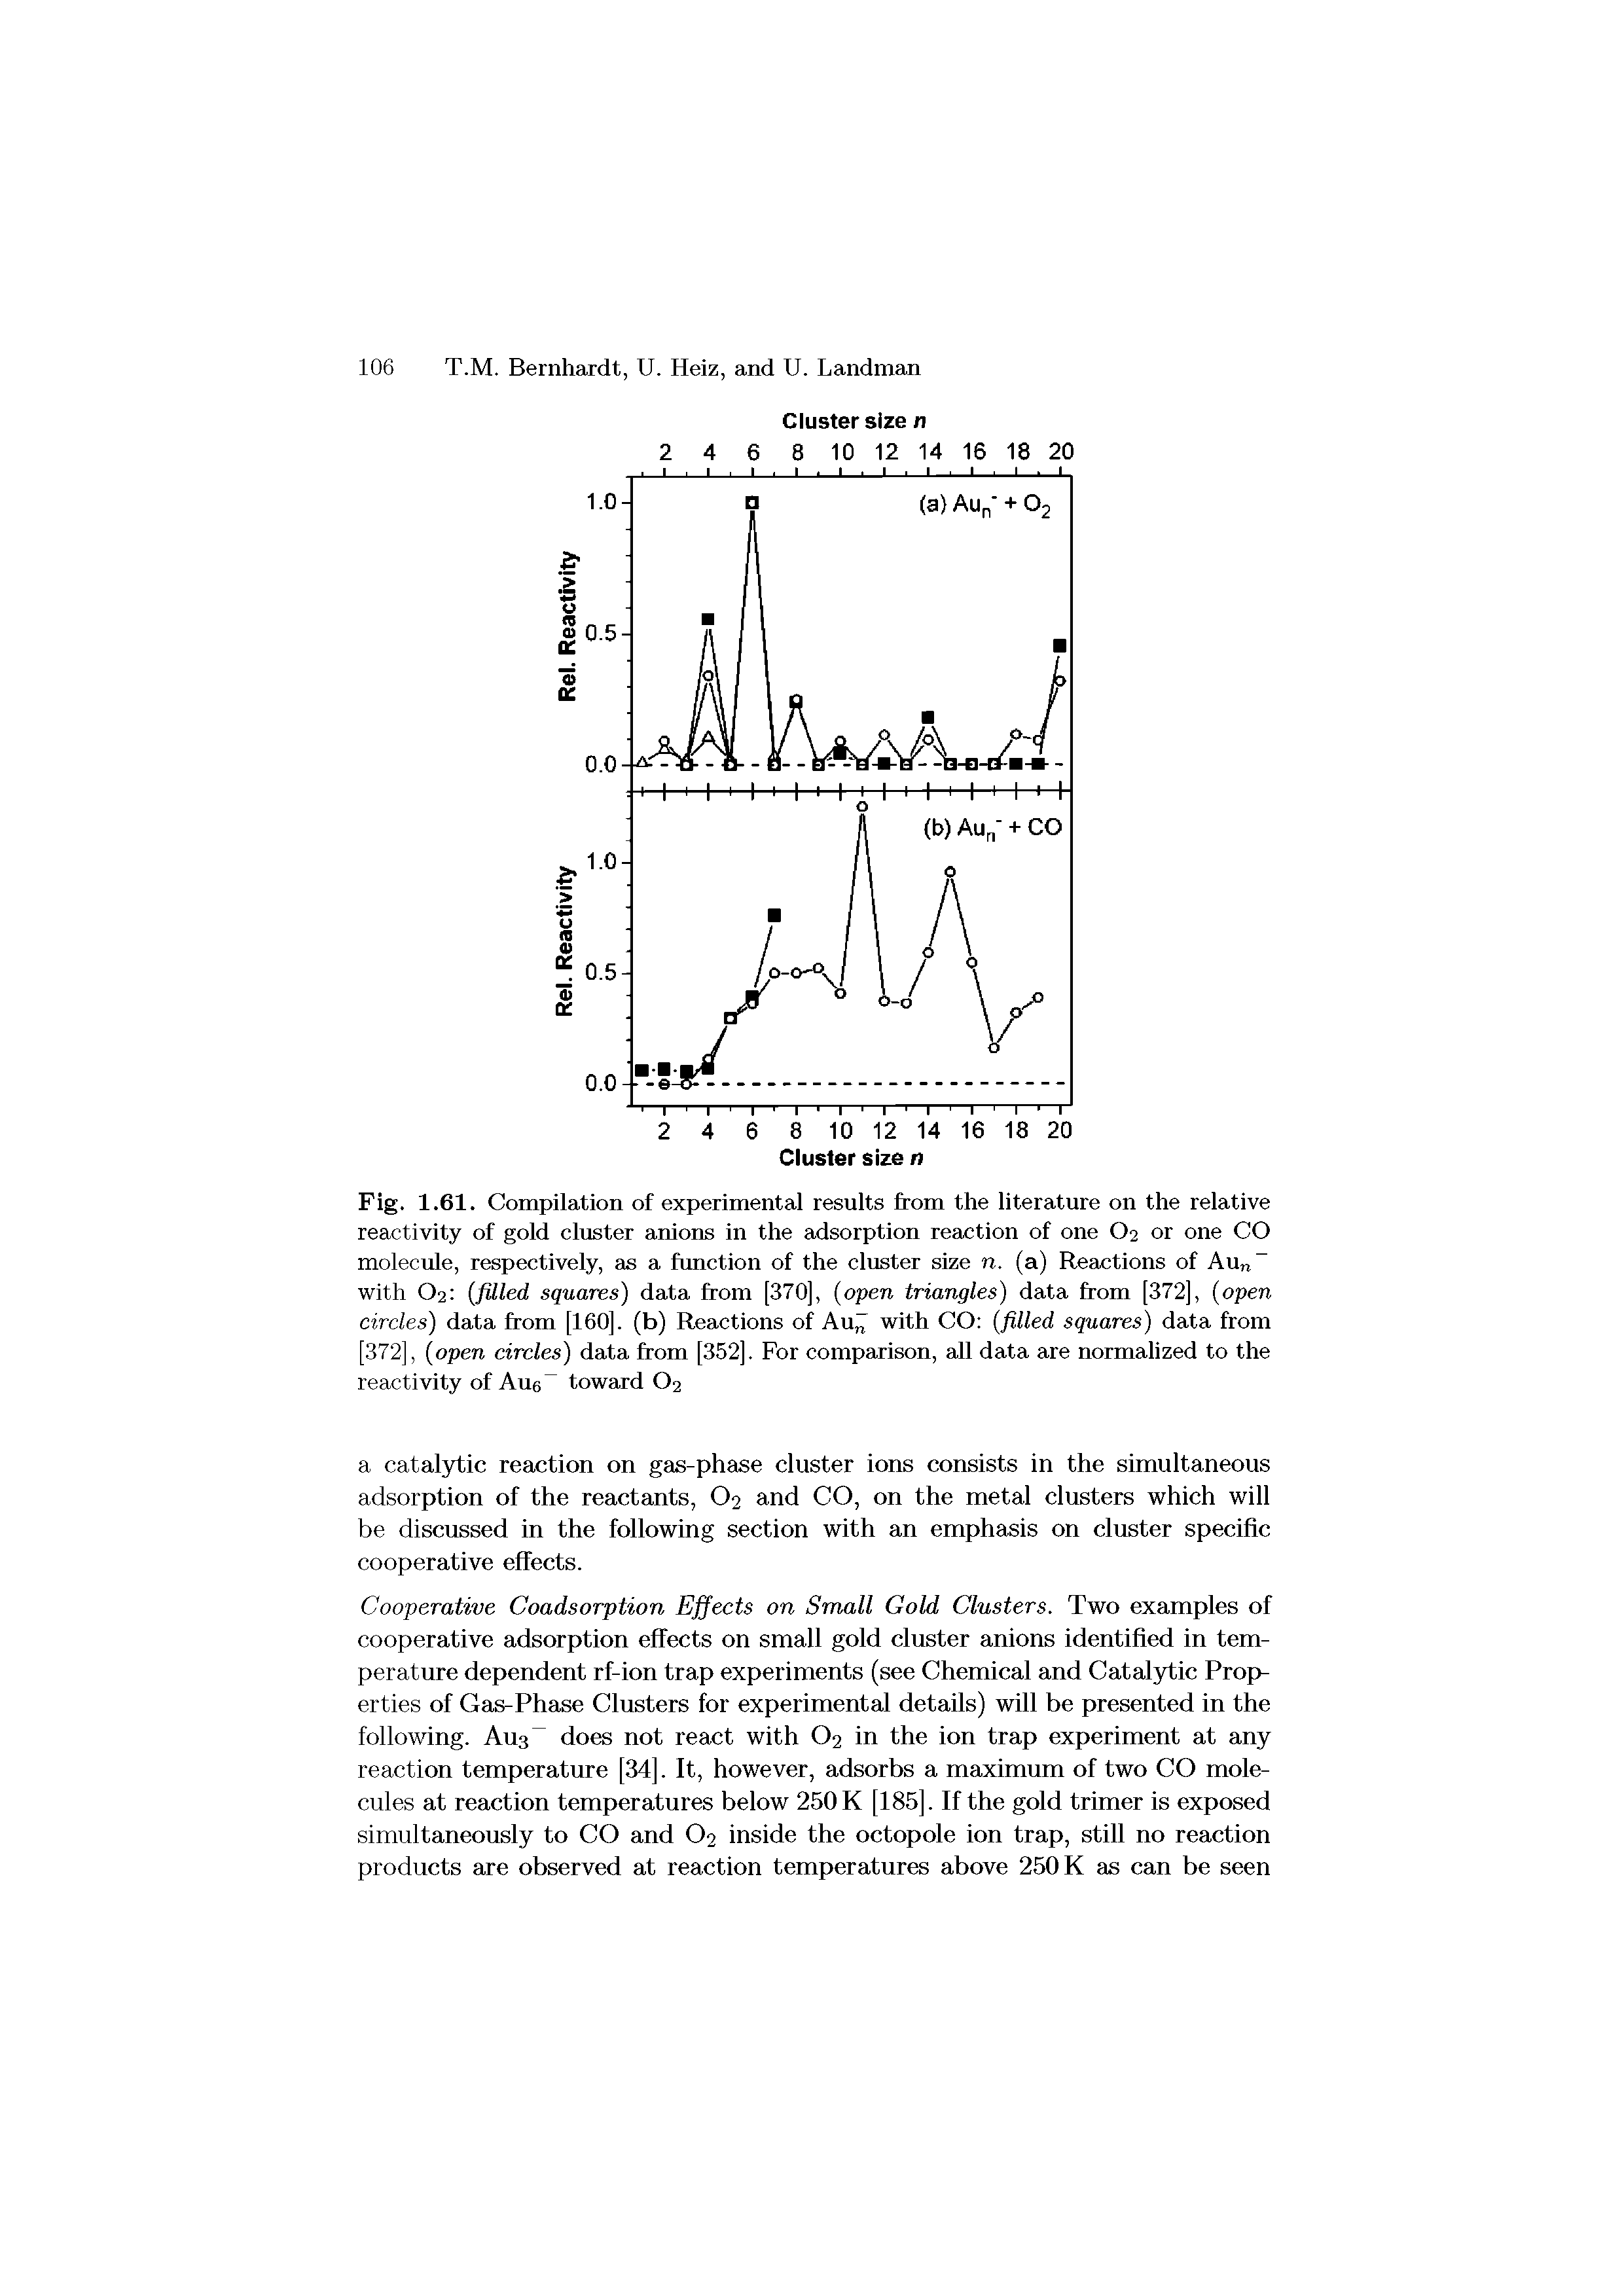 Fig. 1.61. Compilation of experimentai resuits from the iiterature on the reiative reactivity of gold cluster anions in the adsorption reaction of one O2 or one CO molecule, respectively, as a function of the ciuster size n. (a) Reactions of Aun with O2 filled squares) data from [370], open triangles) data from [372], open circles) data from [160]. (b) Reactions of An with CO filled squares) data from [372], open circles) data from [352]. For comparison, all data are normalized to the reactivity of Aue toward O2...